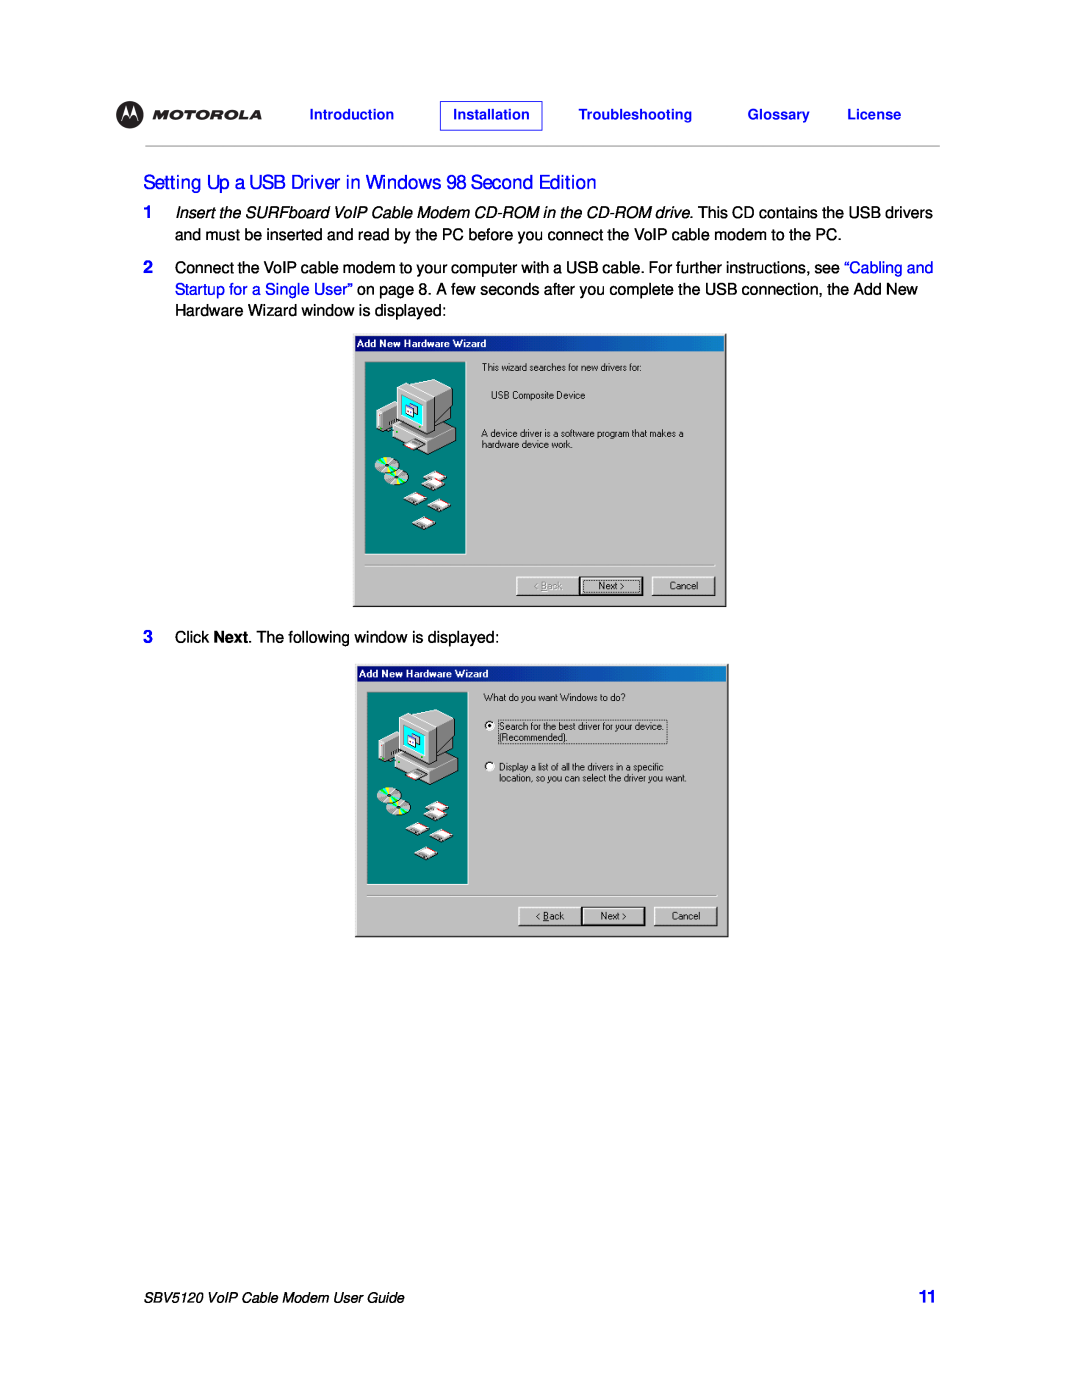 Motorola SBV5120 manual Setting Up a USB Driver in Windows 98 Second Edition 